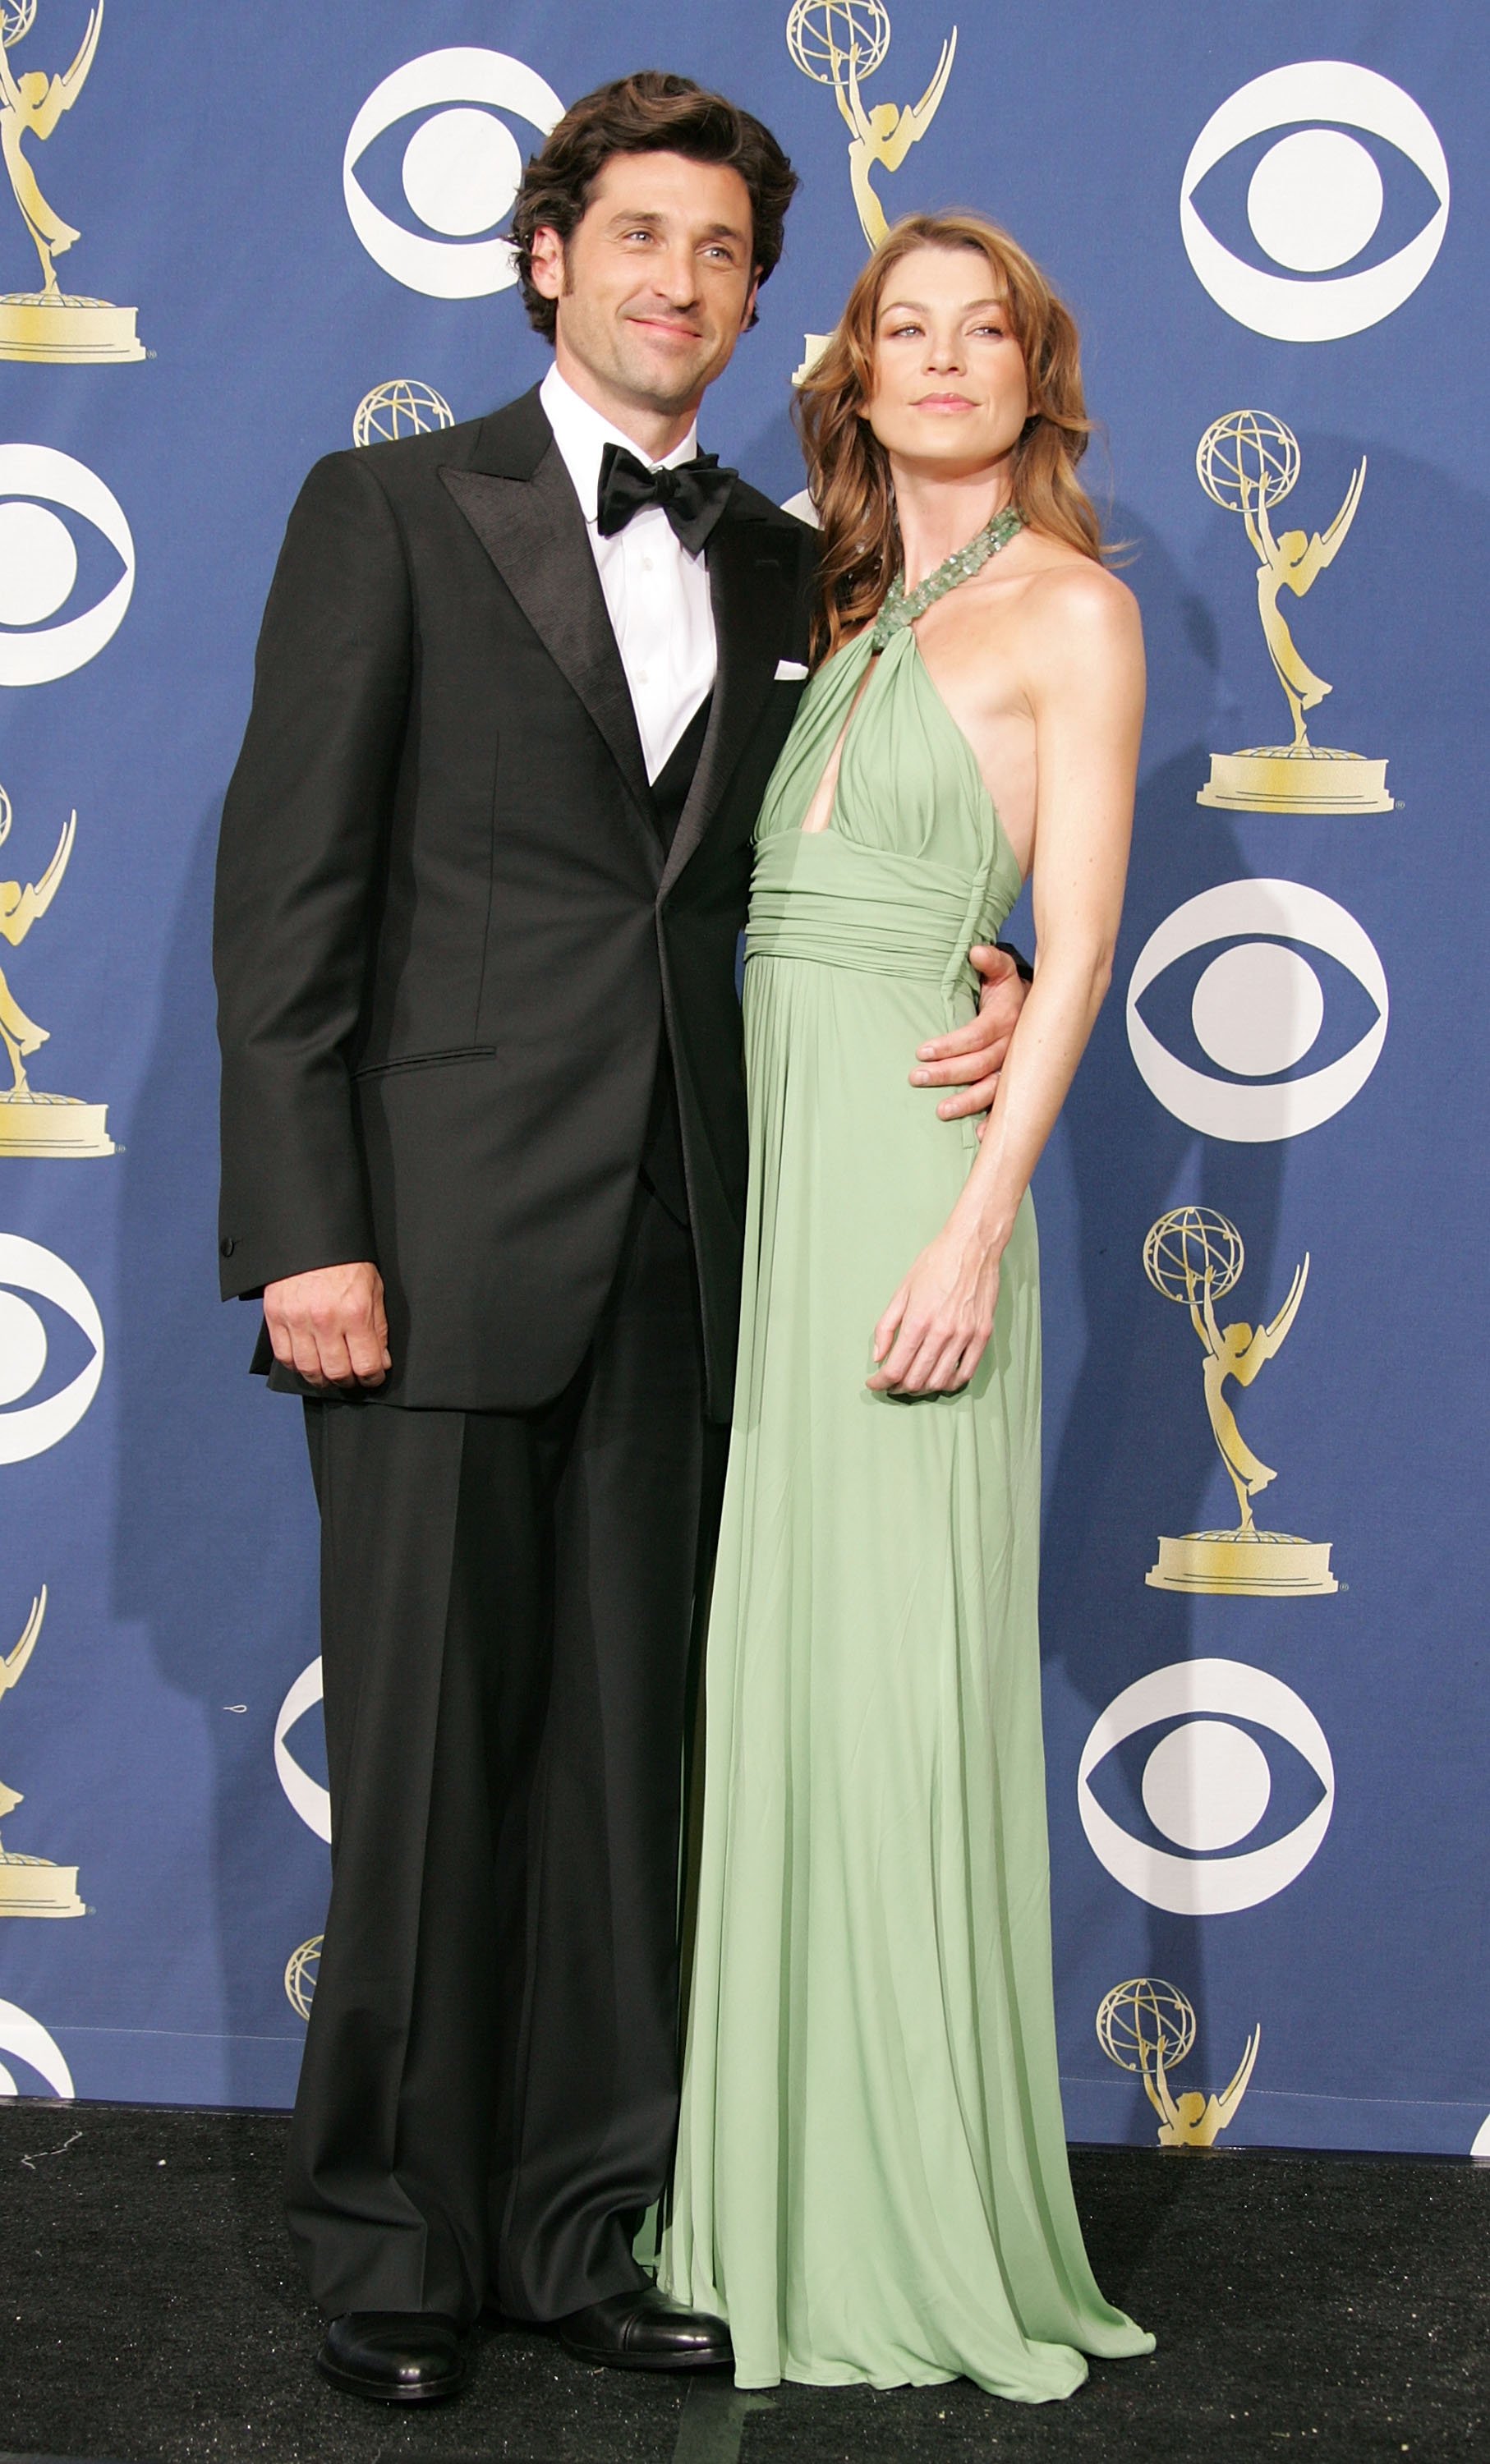 Patrick Dempsey and Ellen Pompeo pictured at the 57th Annual Emmy Awards, 2005, Los Angeles, California. | Photo: Getty Images